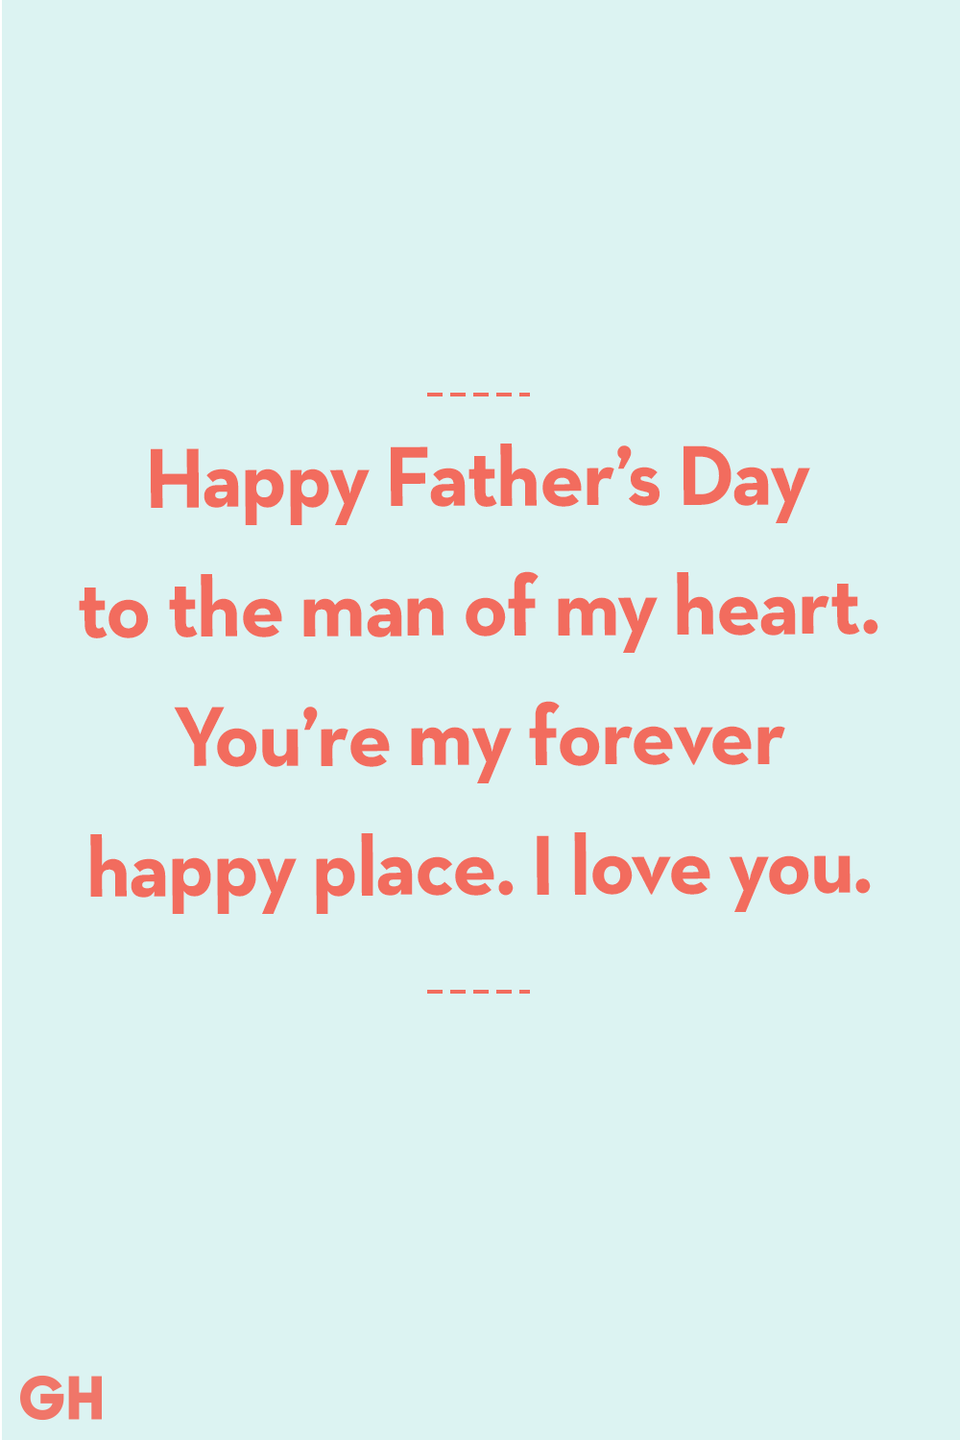 <p>Happy Father’s Day to the man of my heart. You’re my forever happy place. I love you.</p>